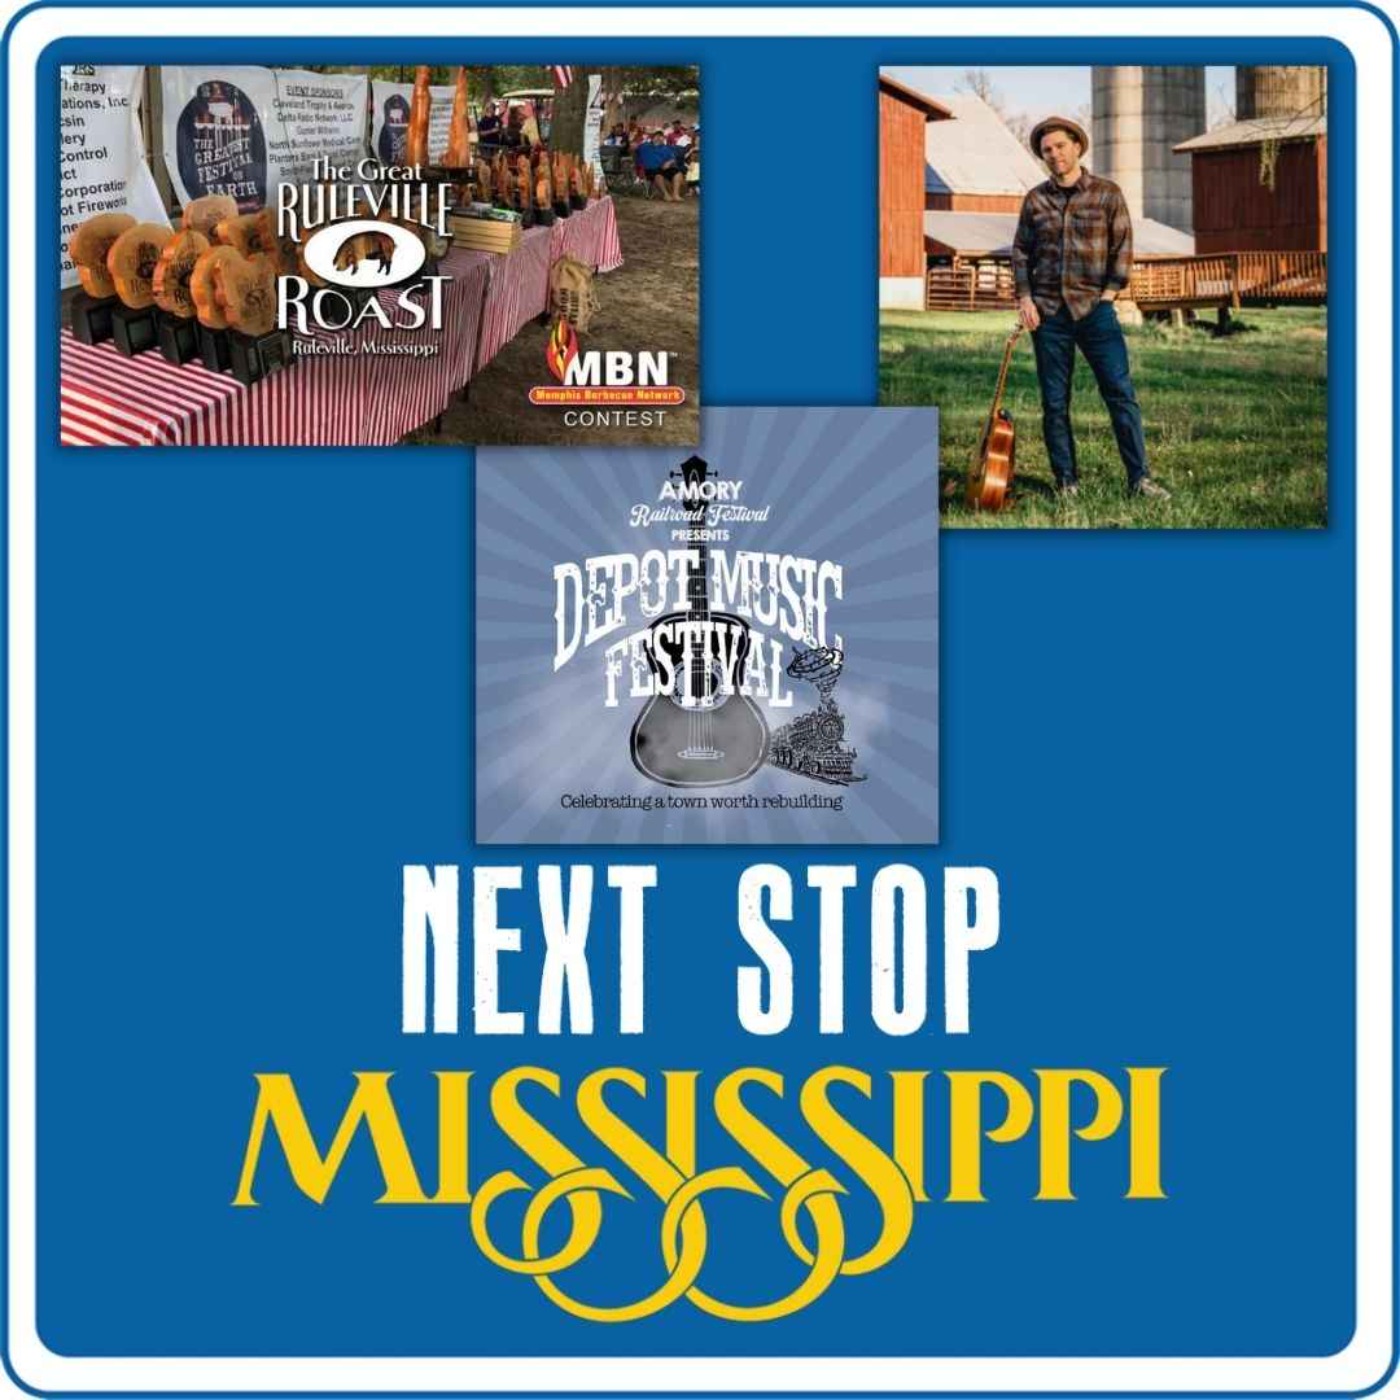 cover art for Next Stop MS | Amory's Depot Music Festival, Eli Lev at Thacker Mountain Radio, & The Great Ruleville Roast